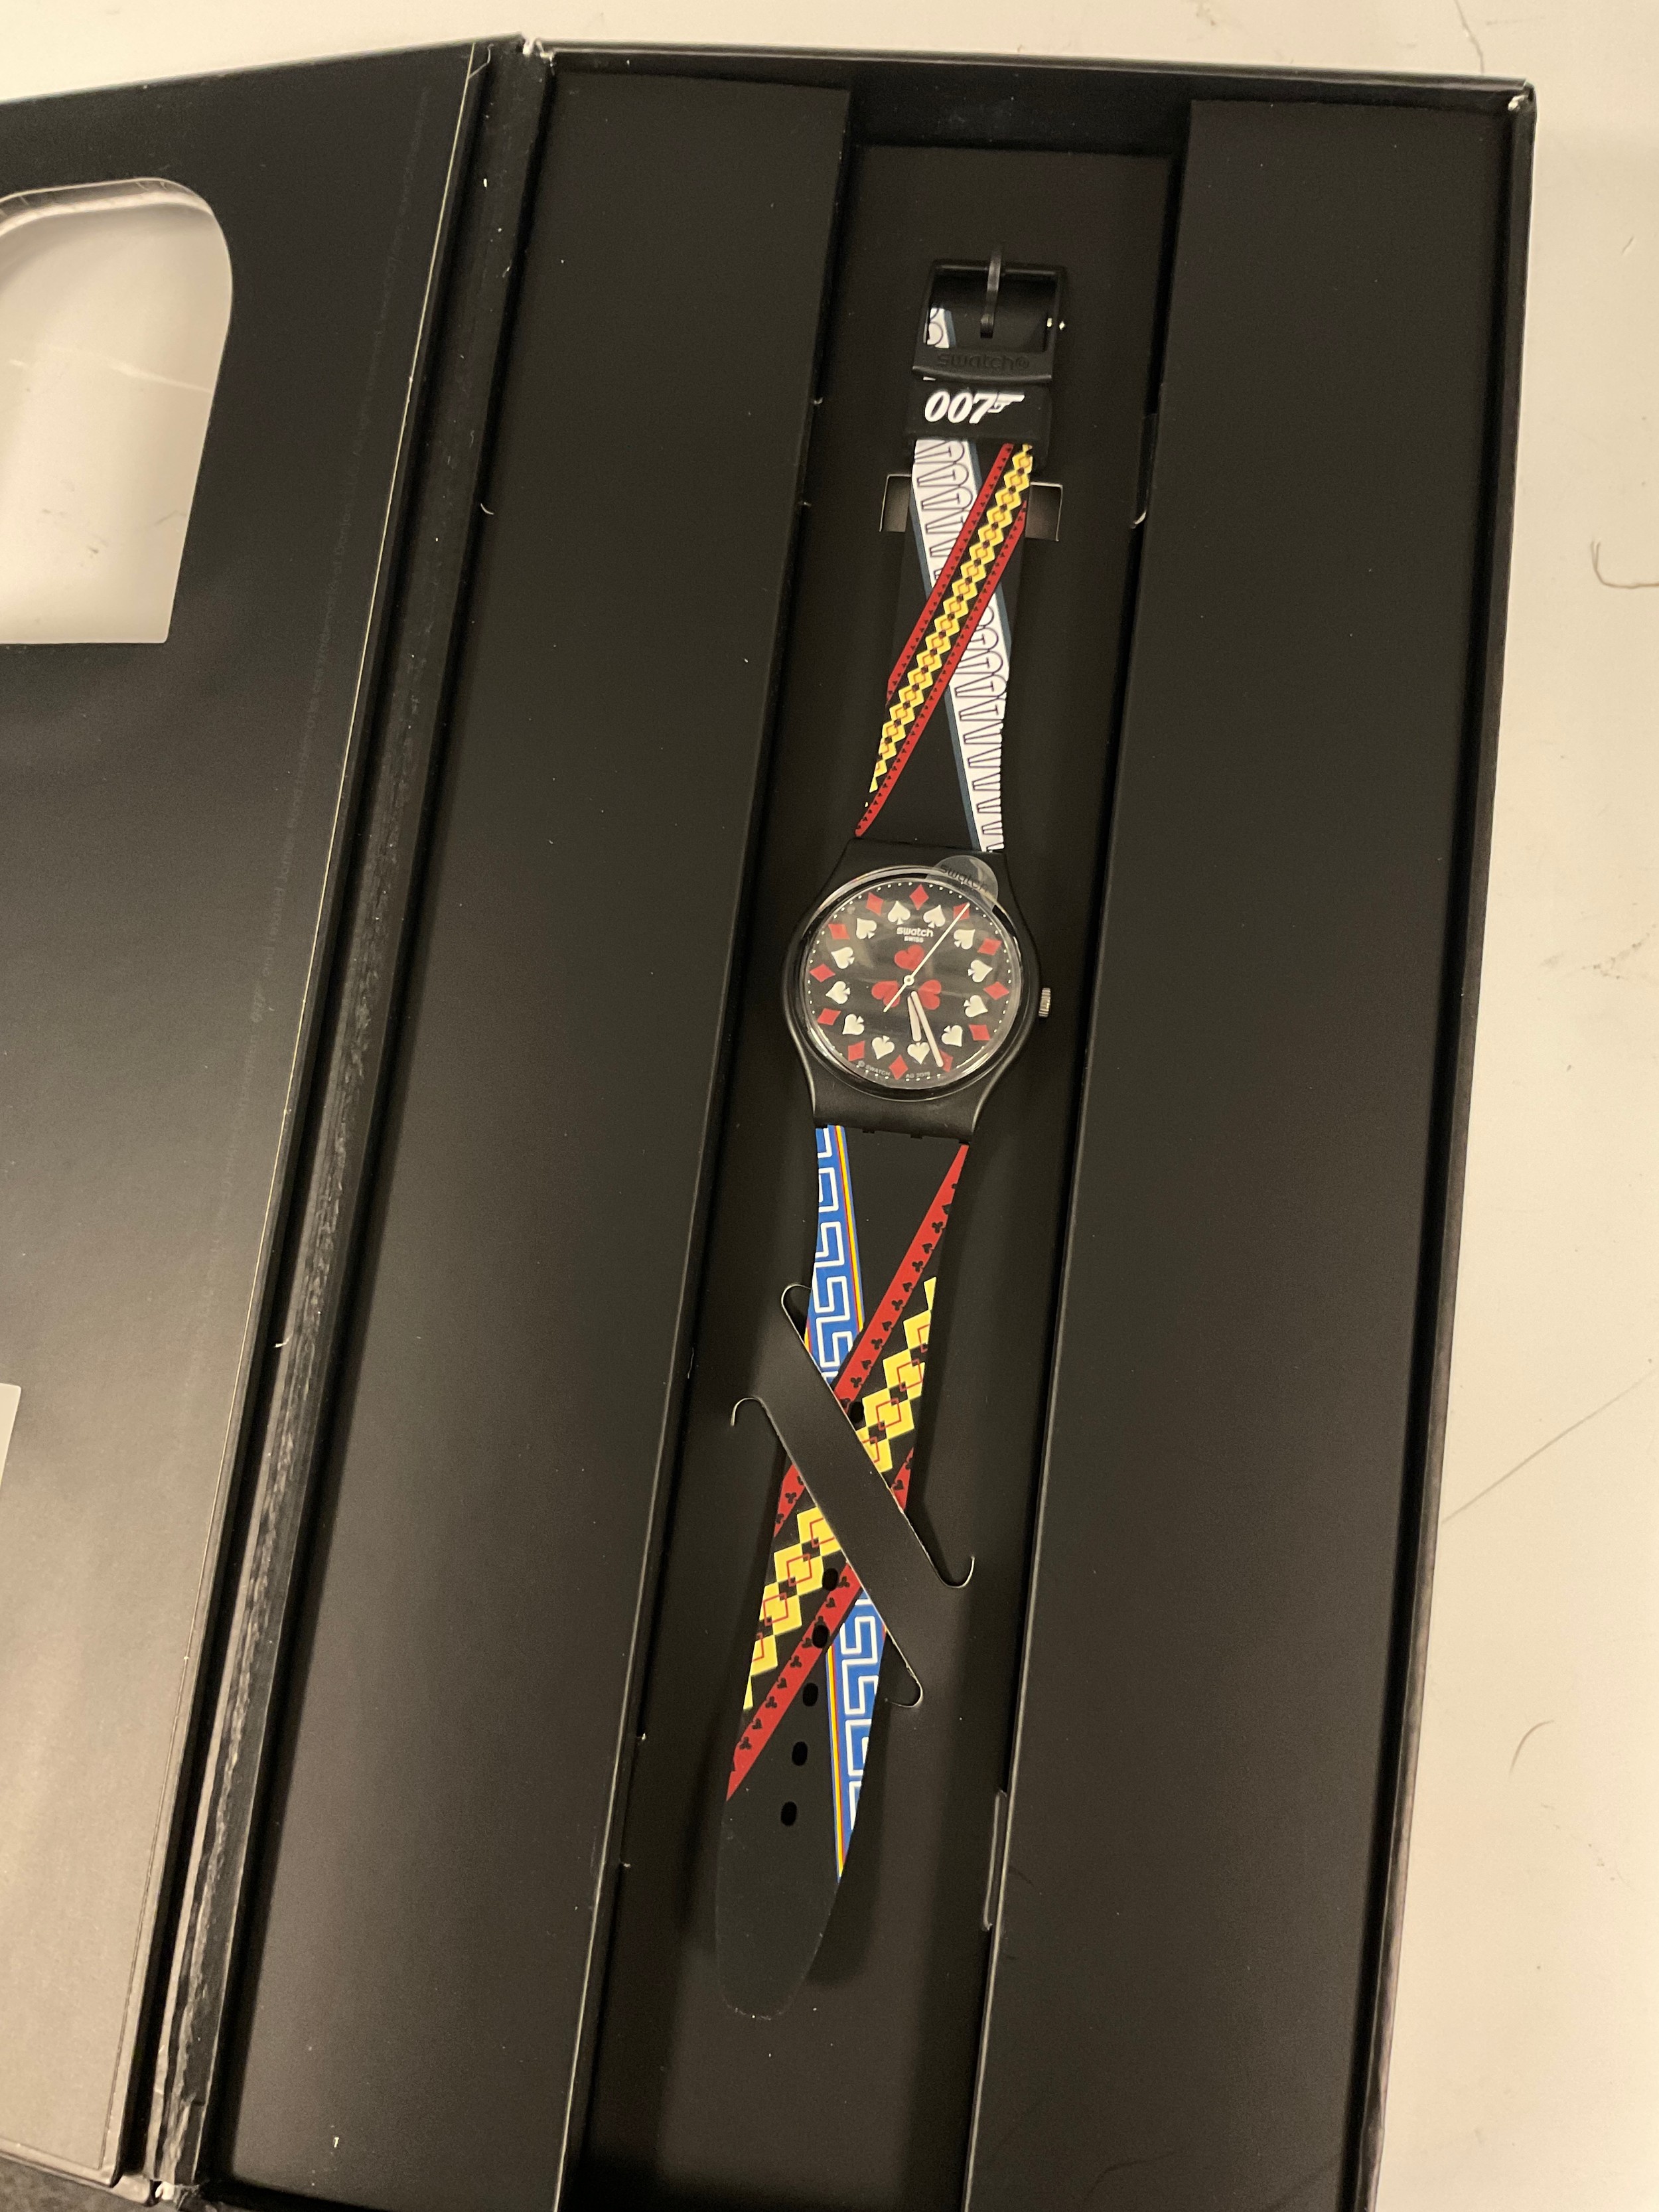 Swatch - the 2020 James Bond Collection Wristwatches, GZ328 Licence To Kill; GZ340 Casino Royale - Image 7 of 9